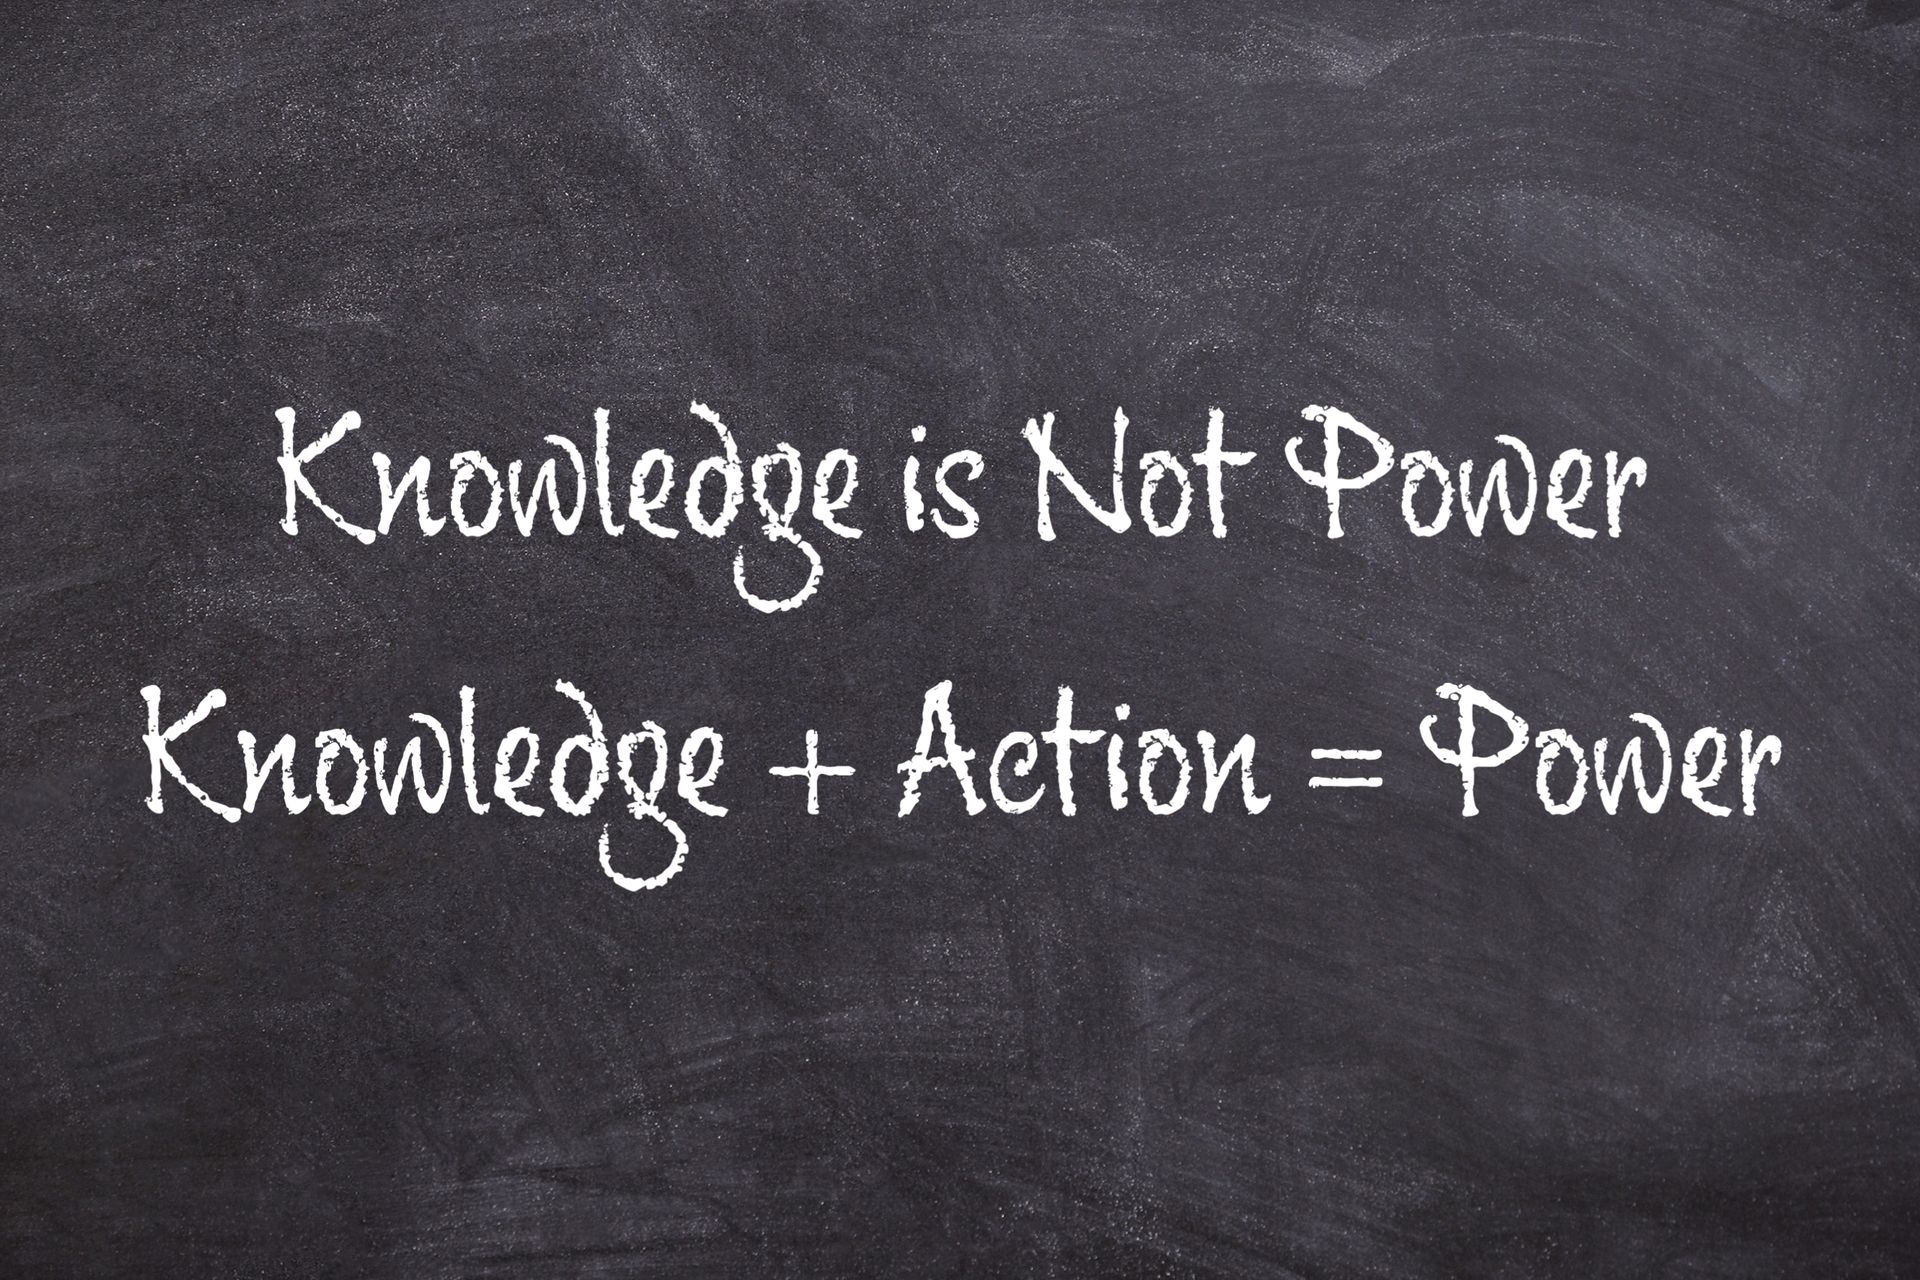 1knowledge is not power